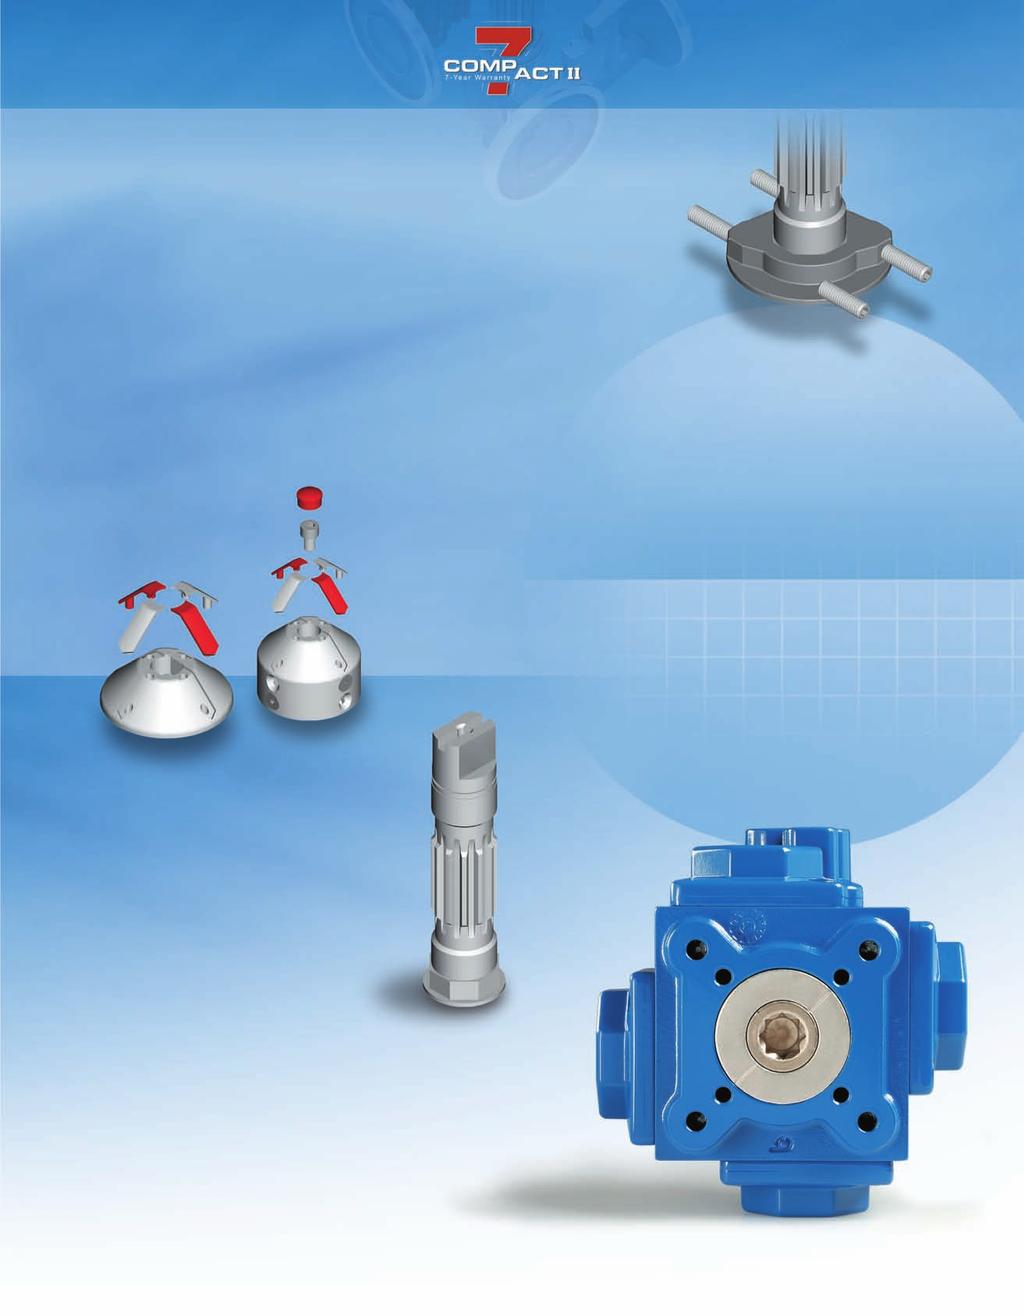 Less Wear Limit Stop With its unique piston design, the Compact II achieves a more uniform load distribution than do single and double piston actuators, therefore greatly reducing gear wear at the